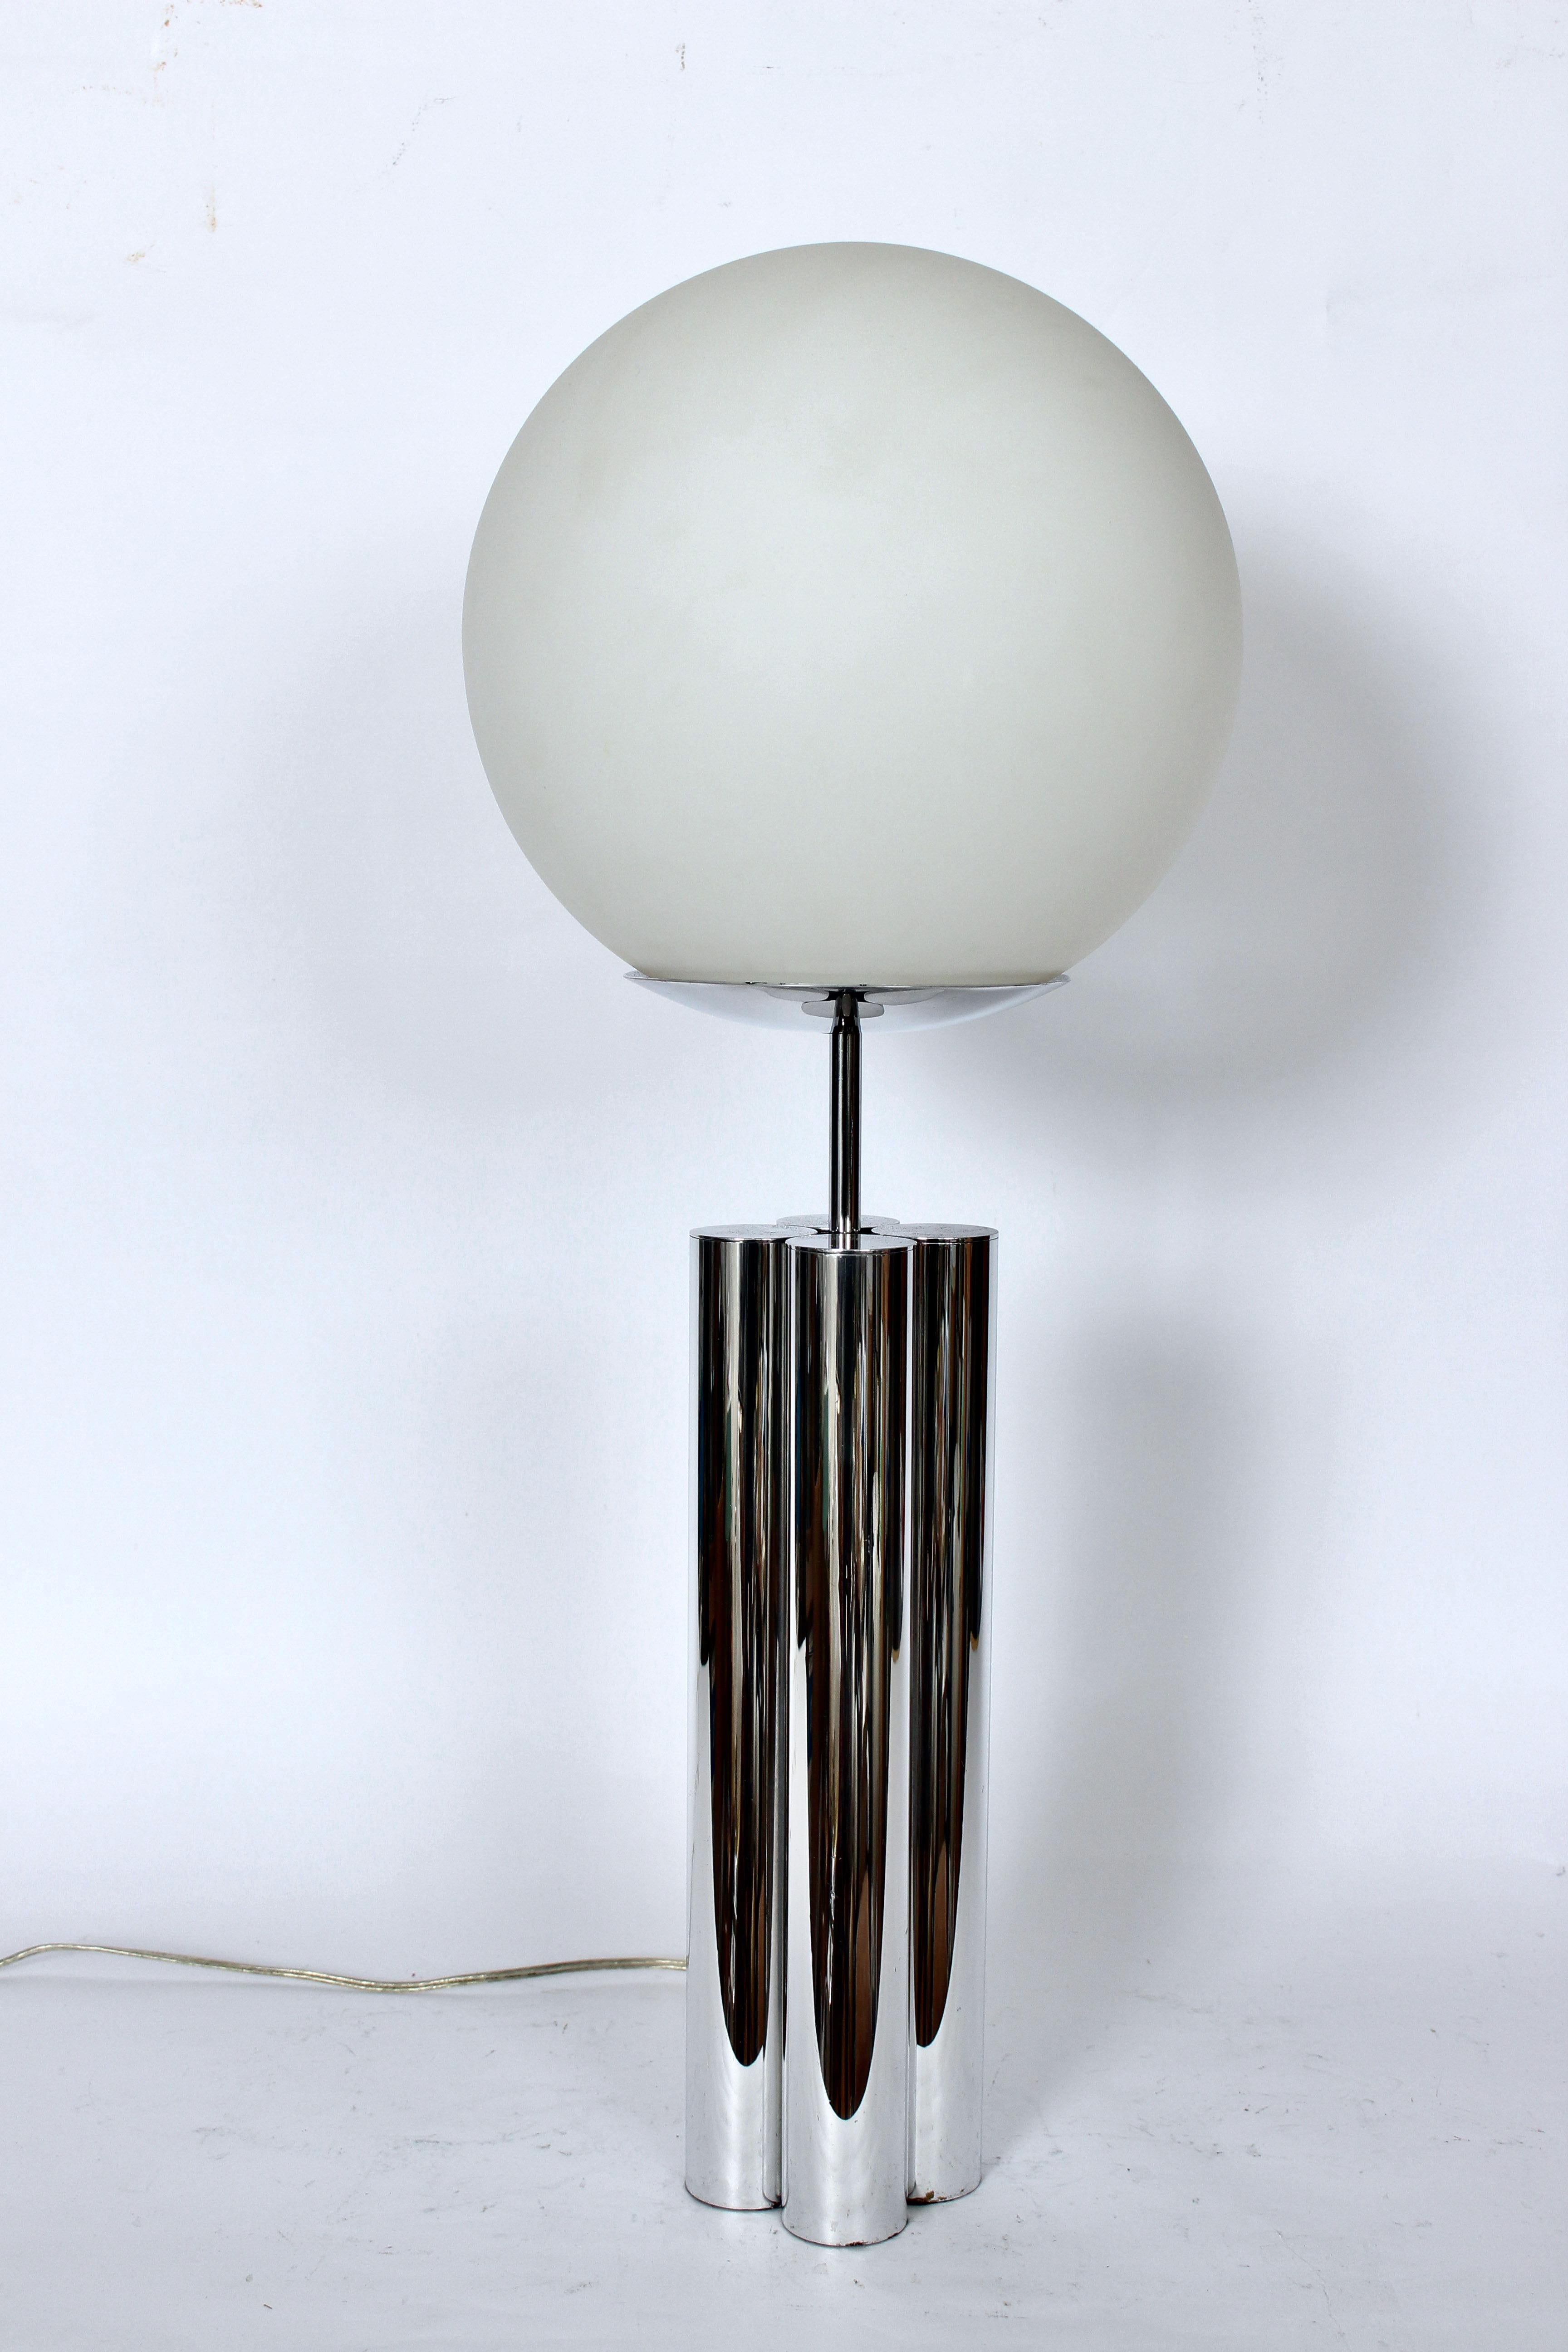 Robert Sonneman 4 Column Polished Aluminum Table Lamp with Frosted Globe, 1960s  In Good Condition For Sale In Bainbridge, NY